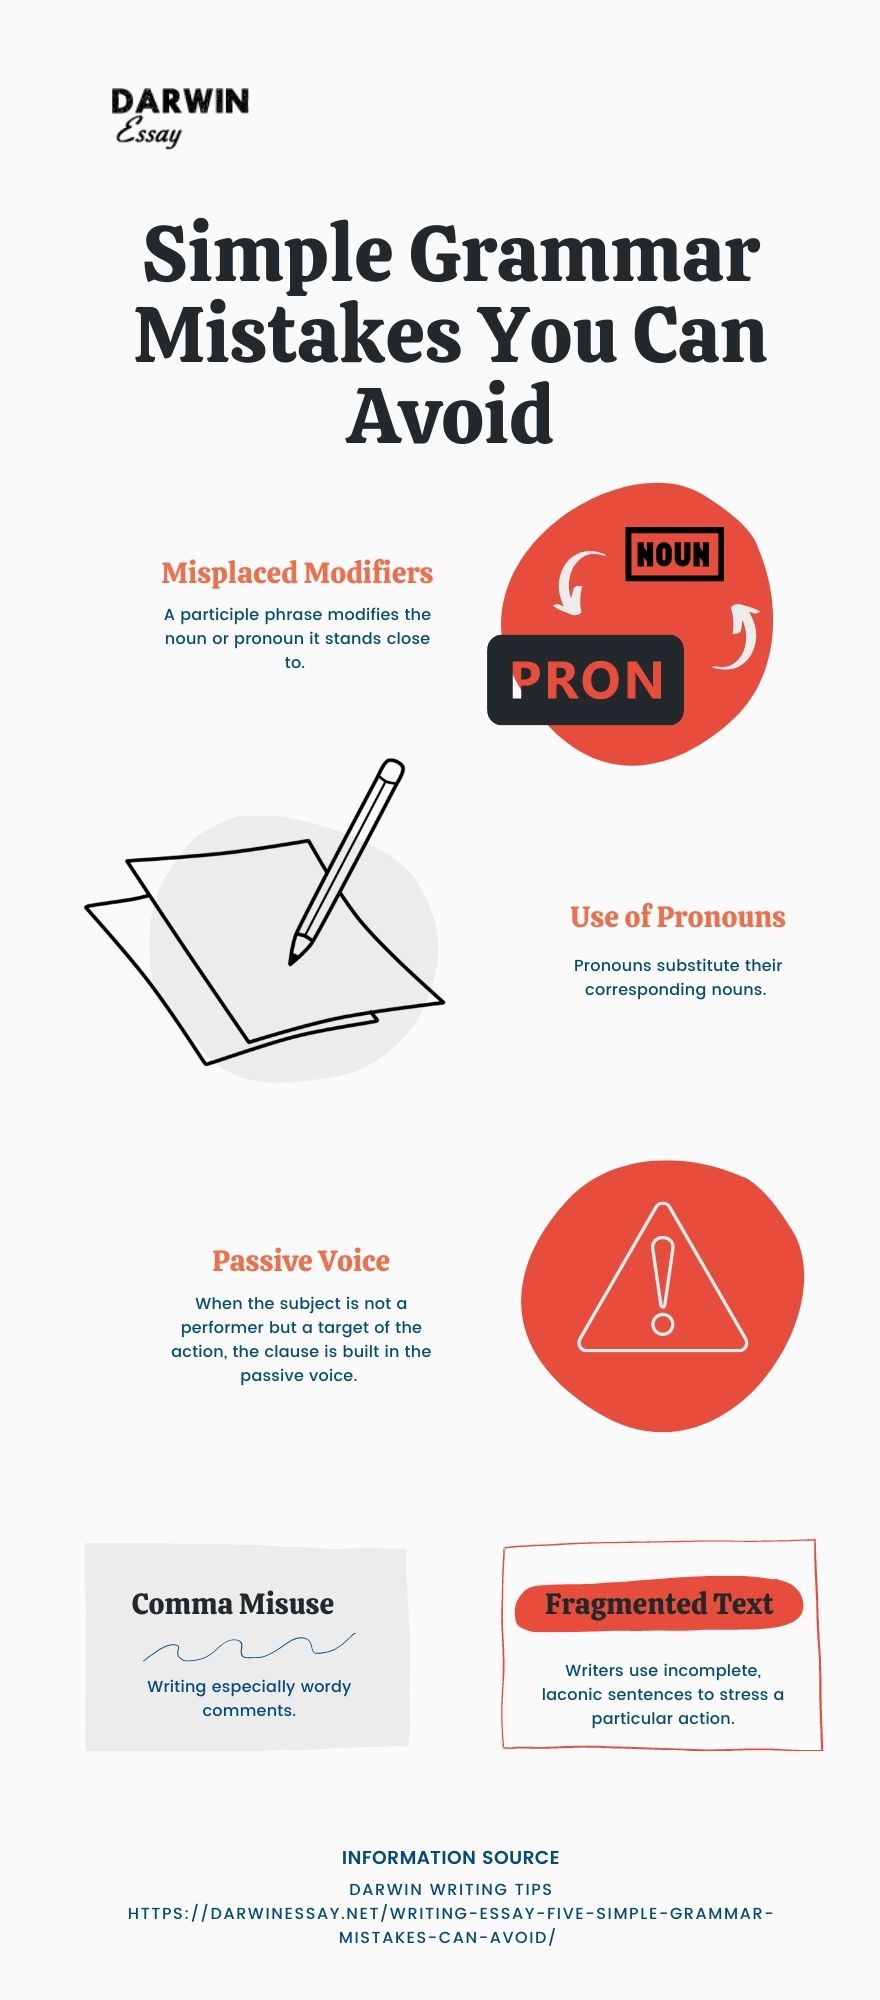 Simple Grammar Mistakes You Can Avoid Infographic by Essay Writers by DarwinEssay.Net